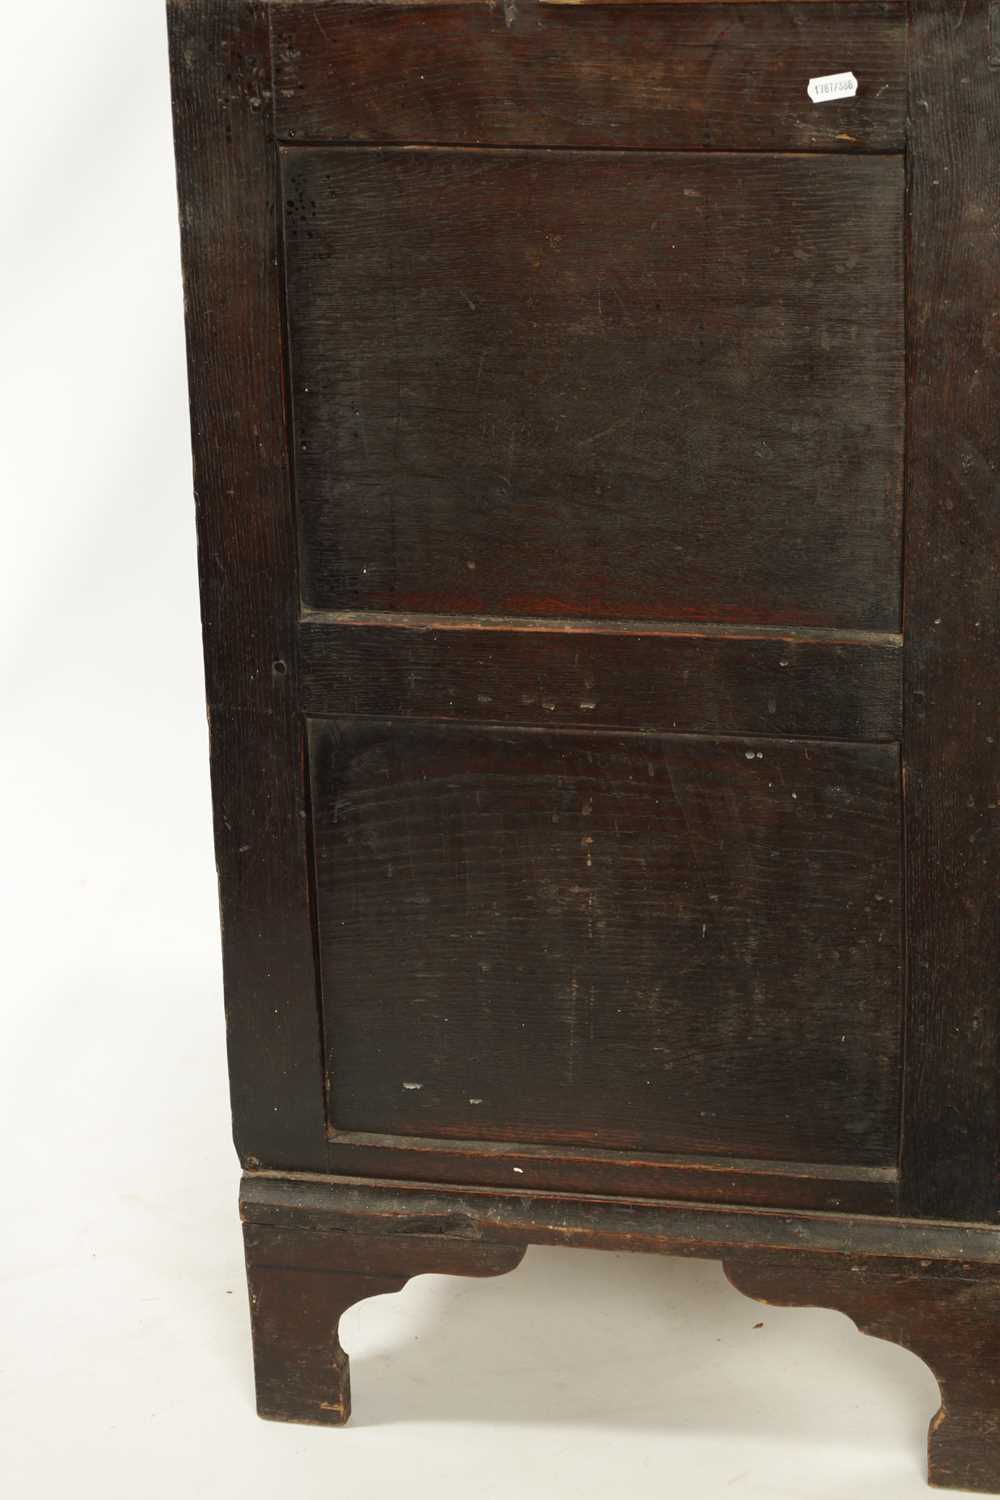 AN EARLY 19TH CENTURY OAK NORFOLK / SUFFOLK CHEST OF DRAWERS - Image 4 of 12